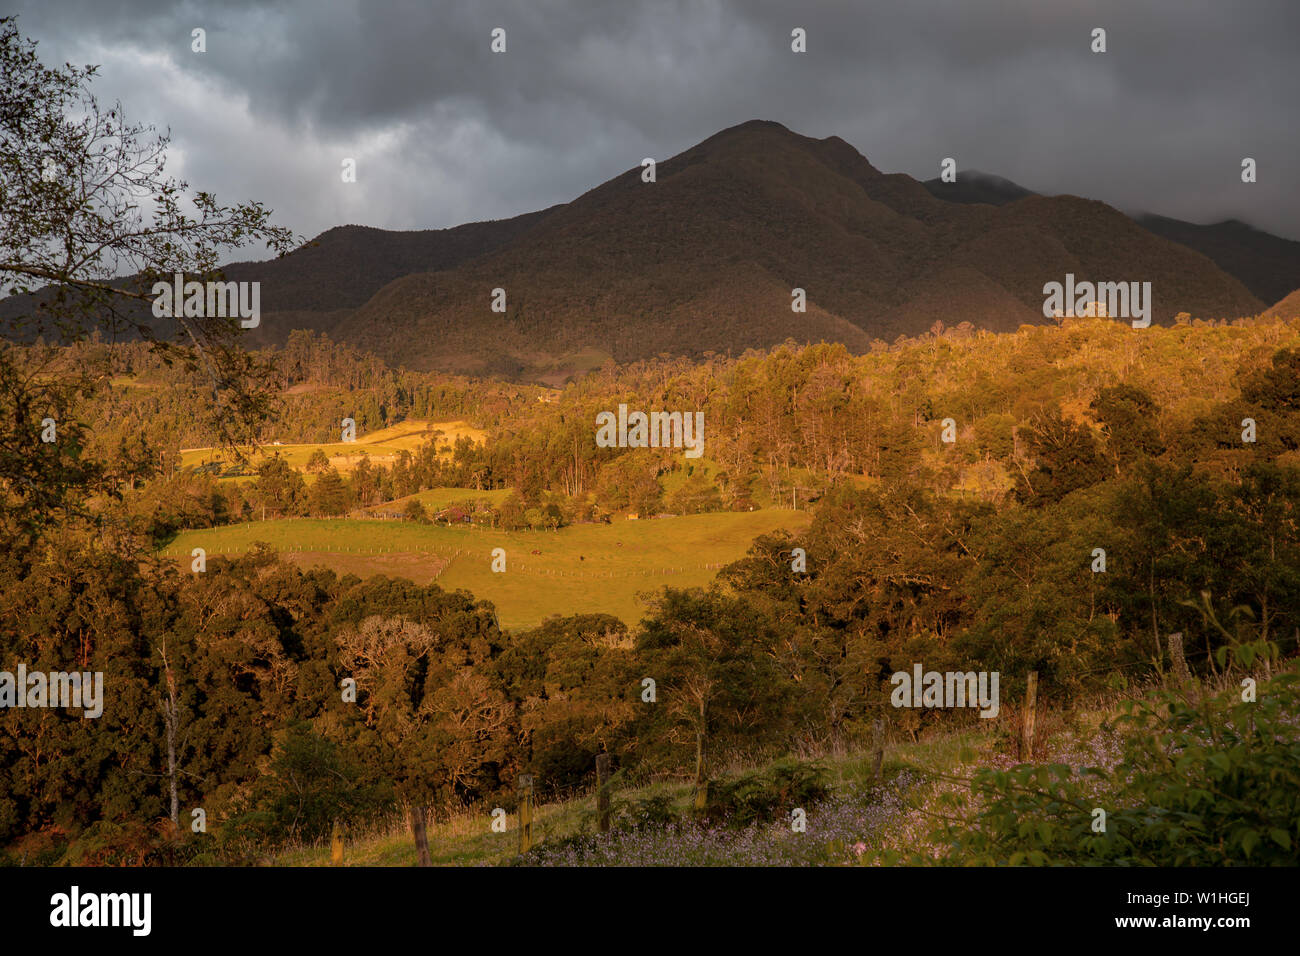 Multiple exposure of a valley and the Iguaque mountain under an overcasted sky illuminated by the sunset, in the central Andean mountains of Colombia. Stock Photo